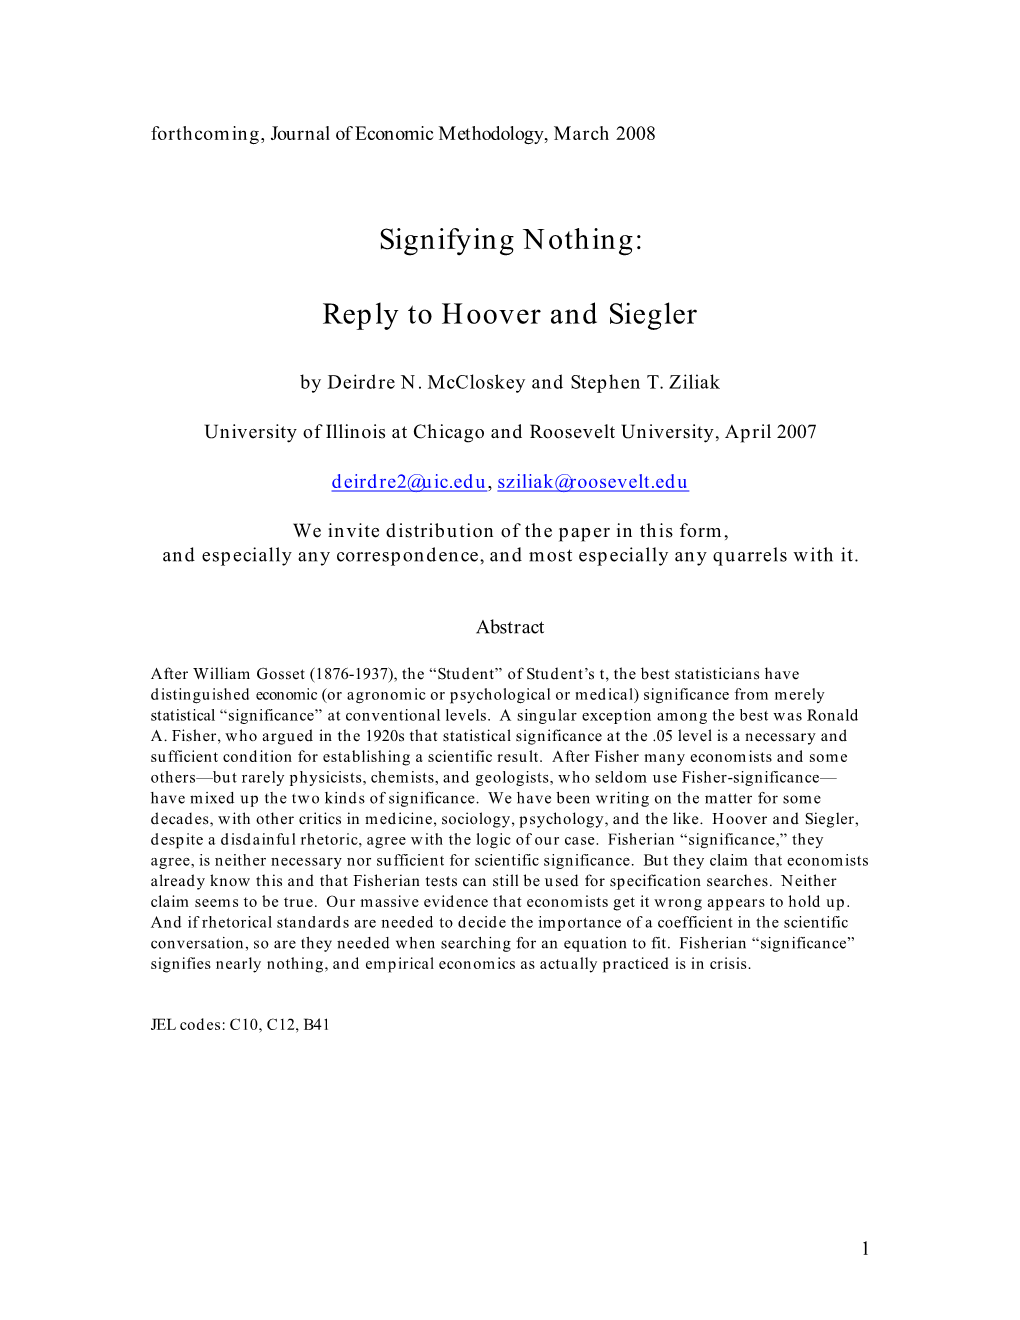 Signifying Nothing: Reply to Hoover and Siegler